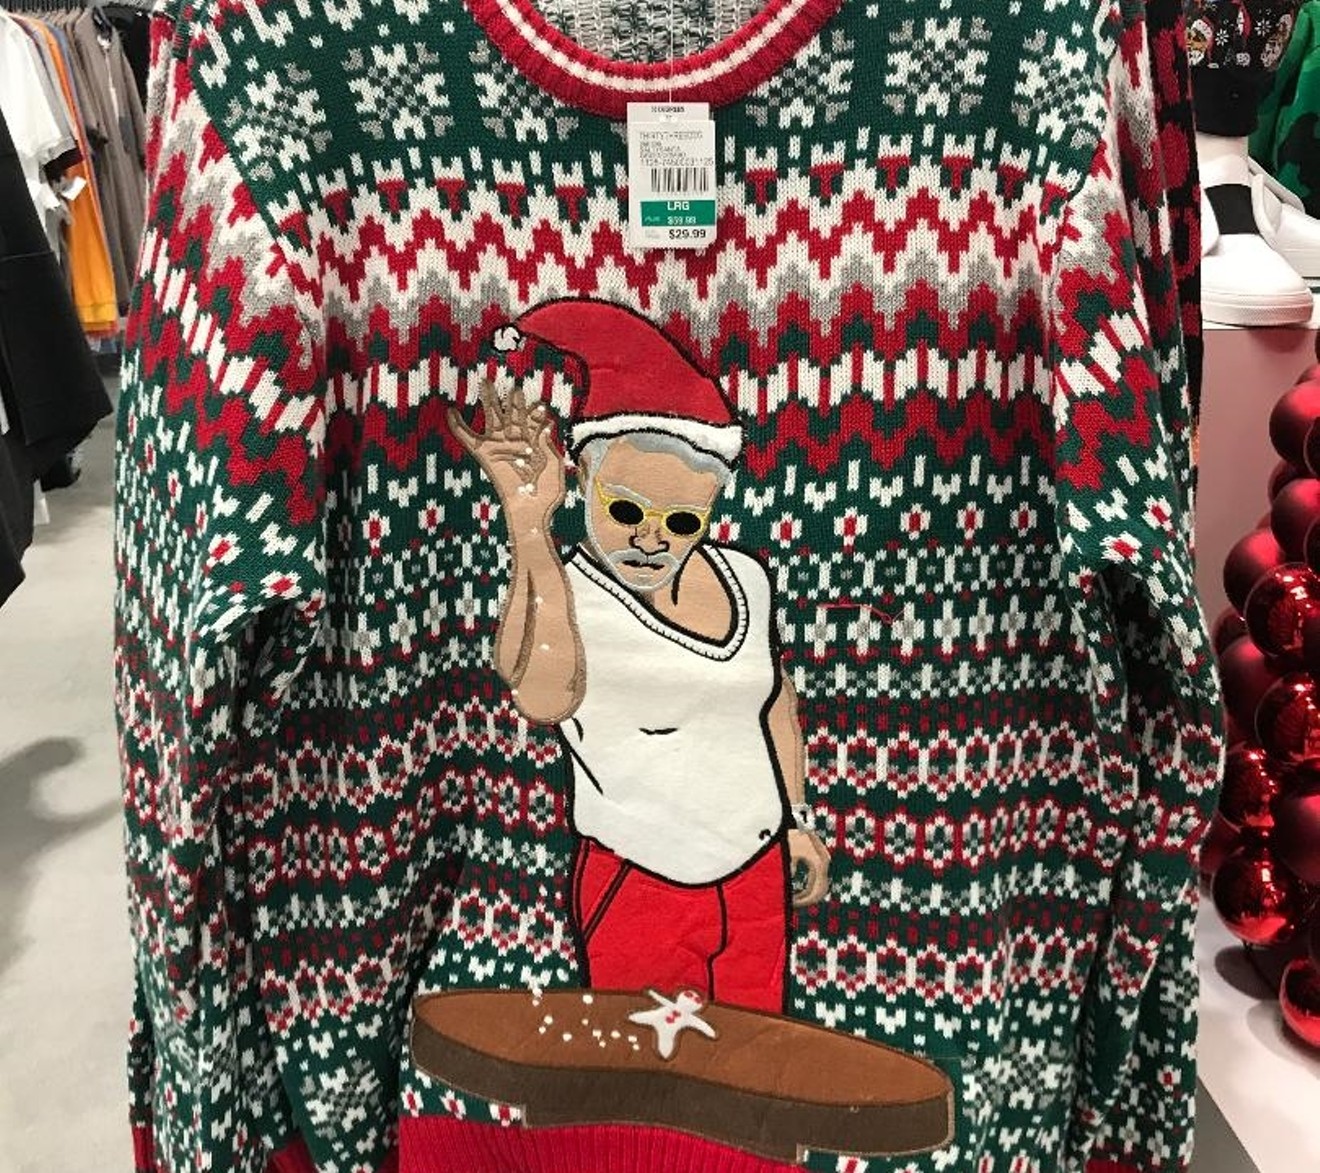 Behold the ugliest ugly sweater